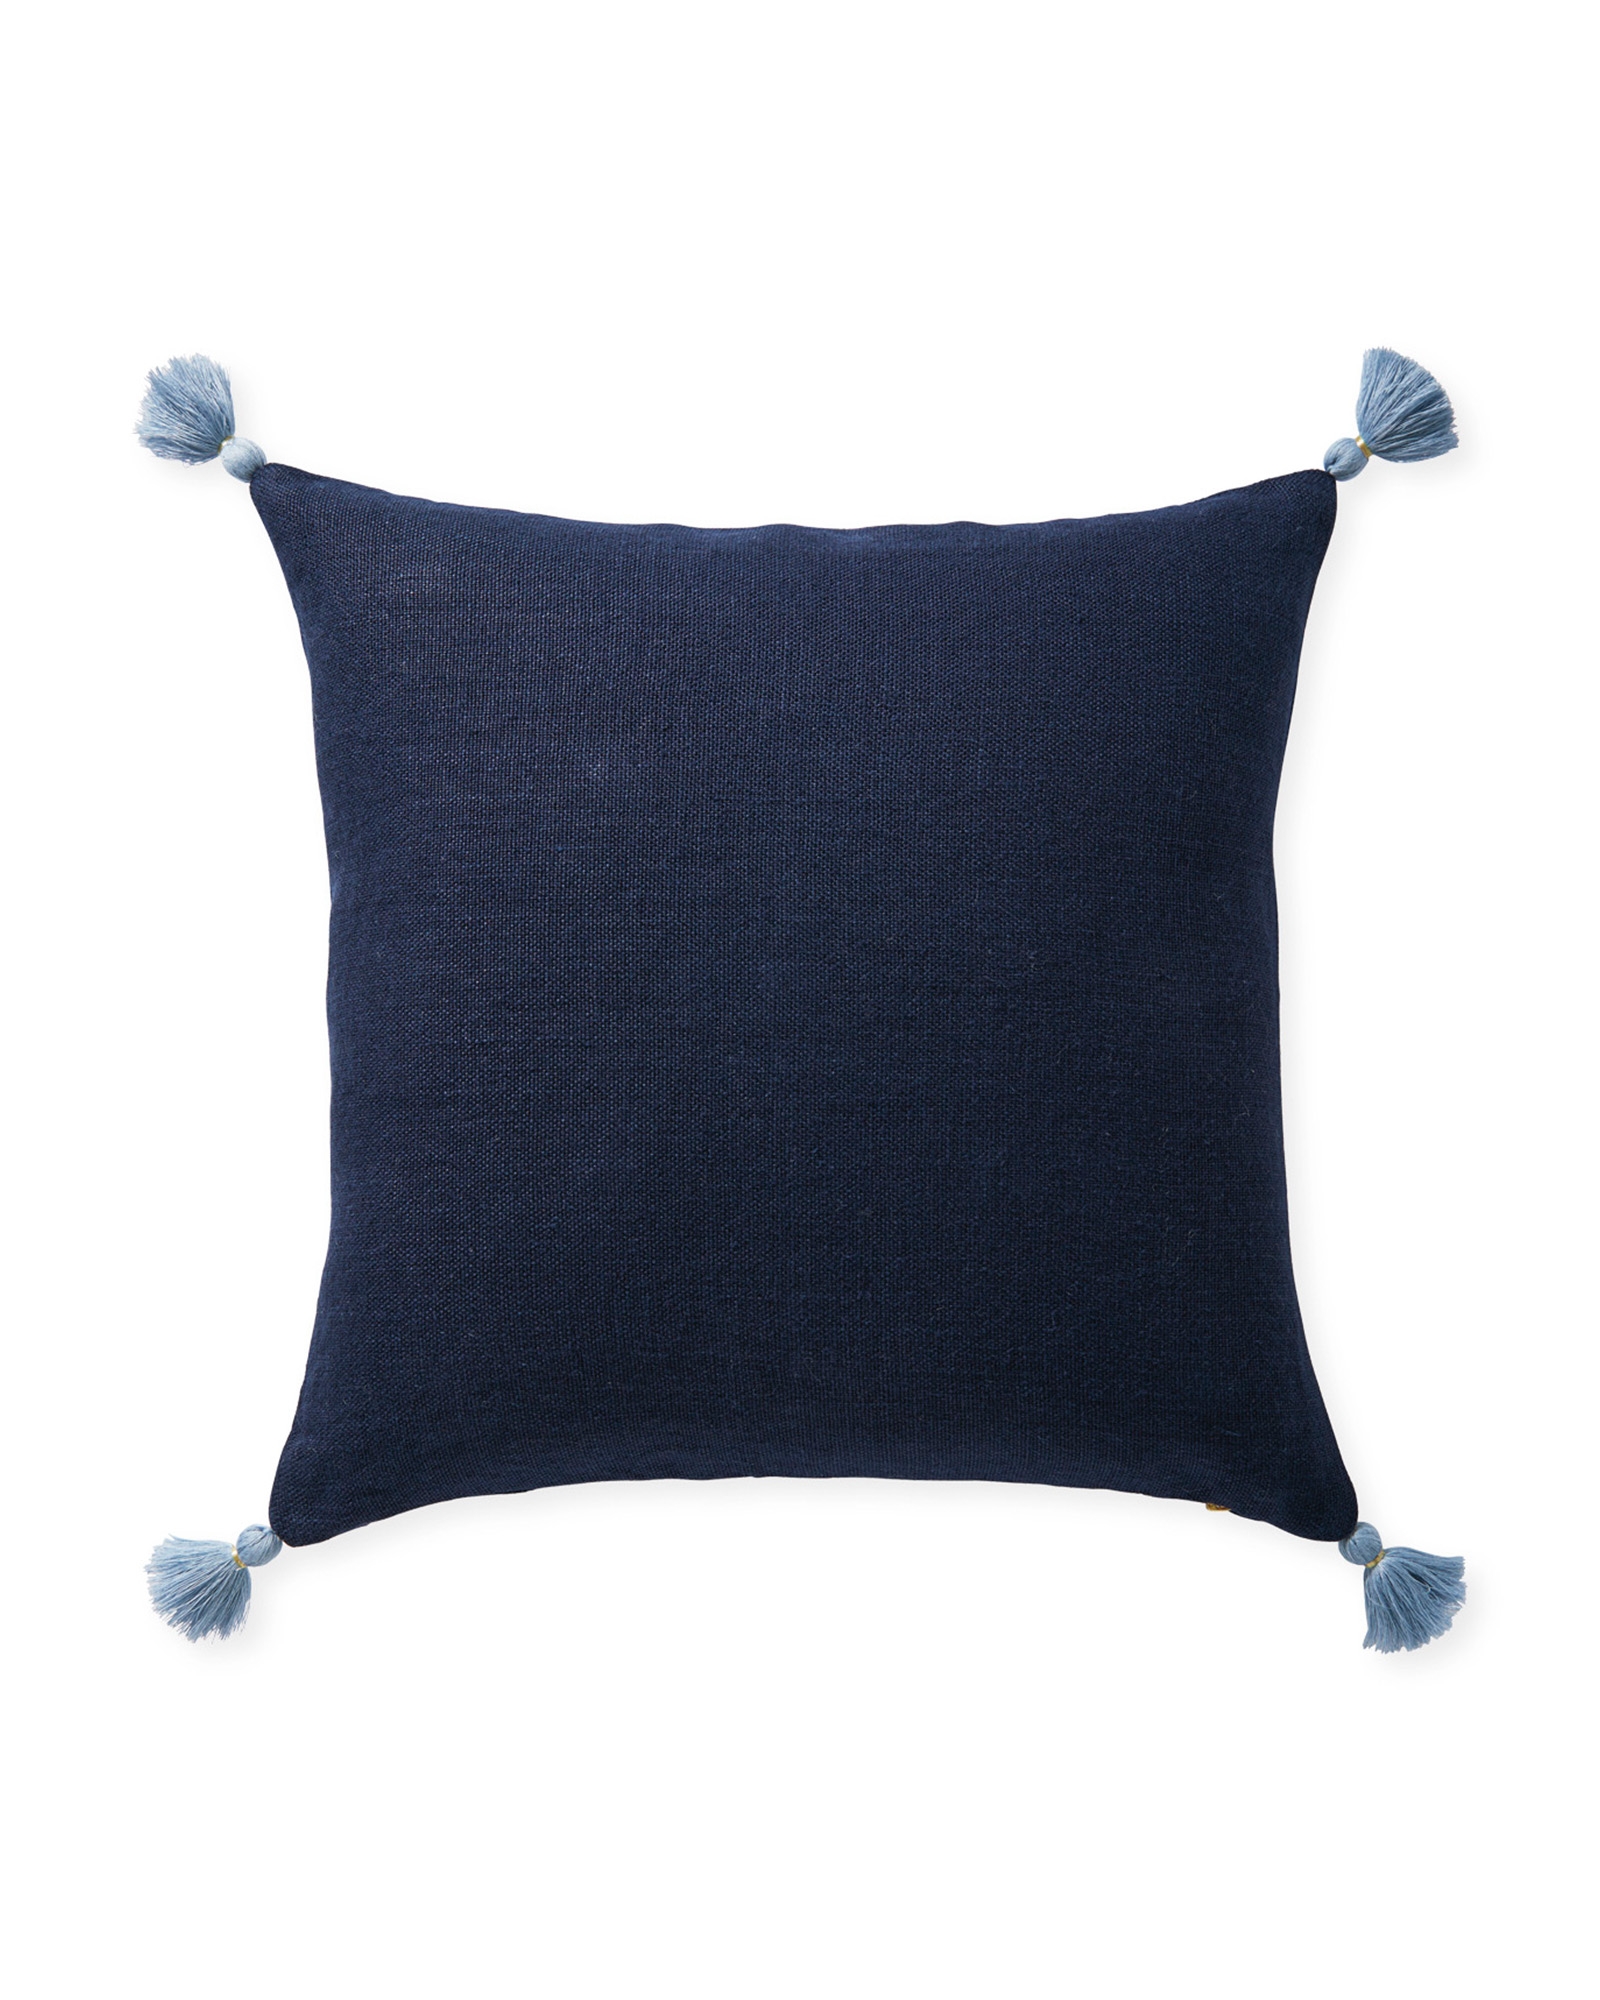 Kemp 20" SQ Pillow Cover - Navy - Insert sold separately - Image 1